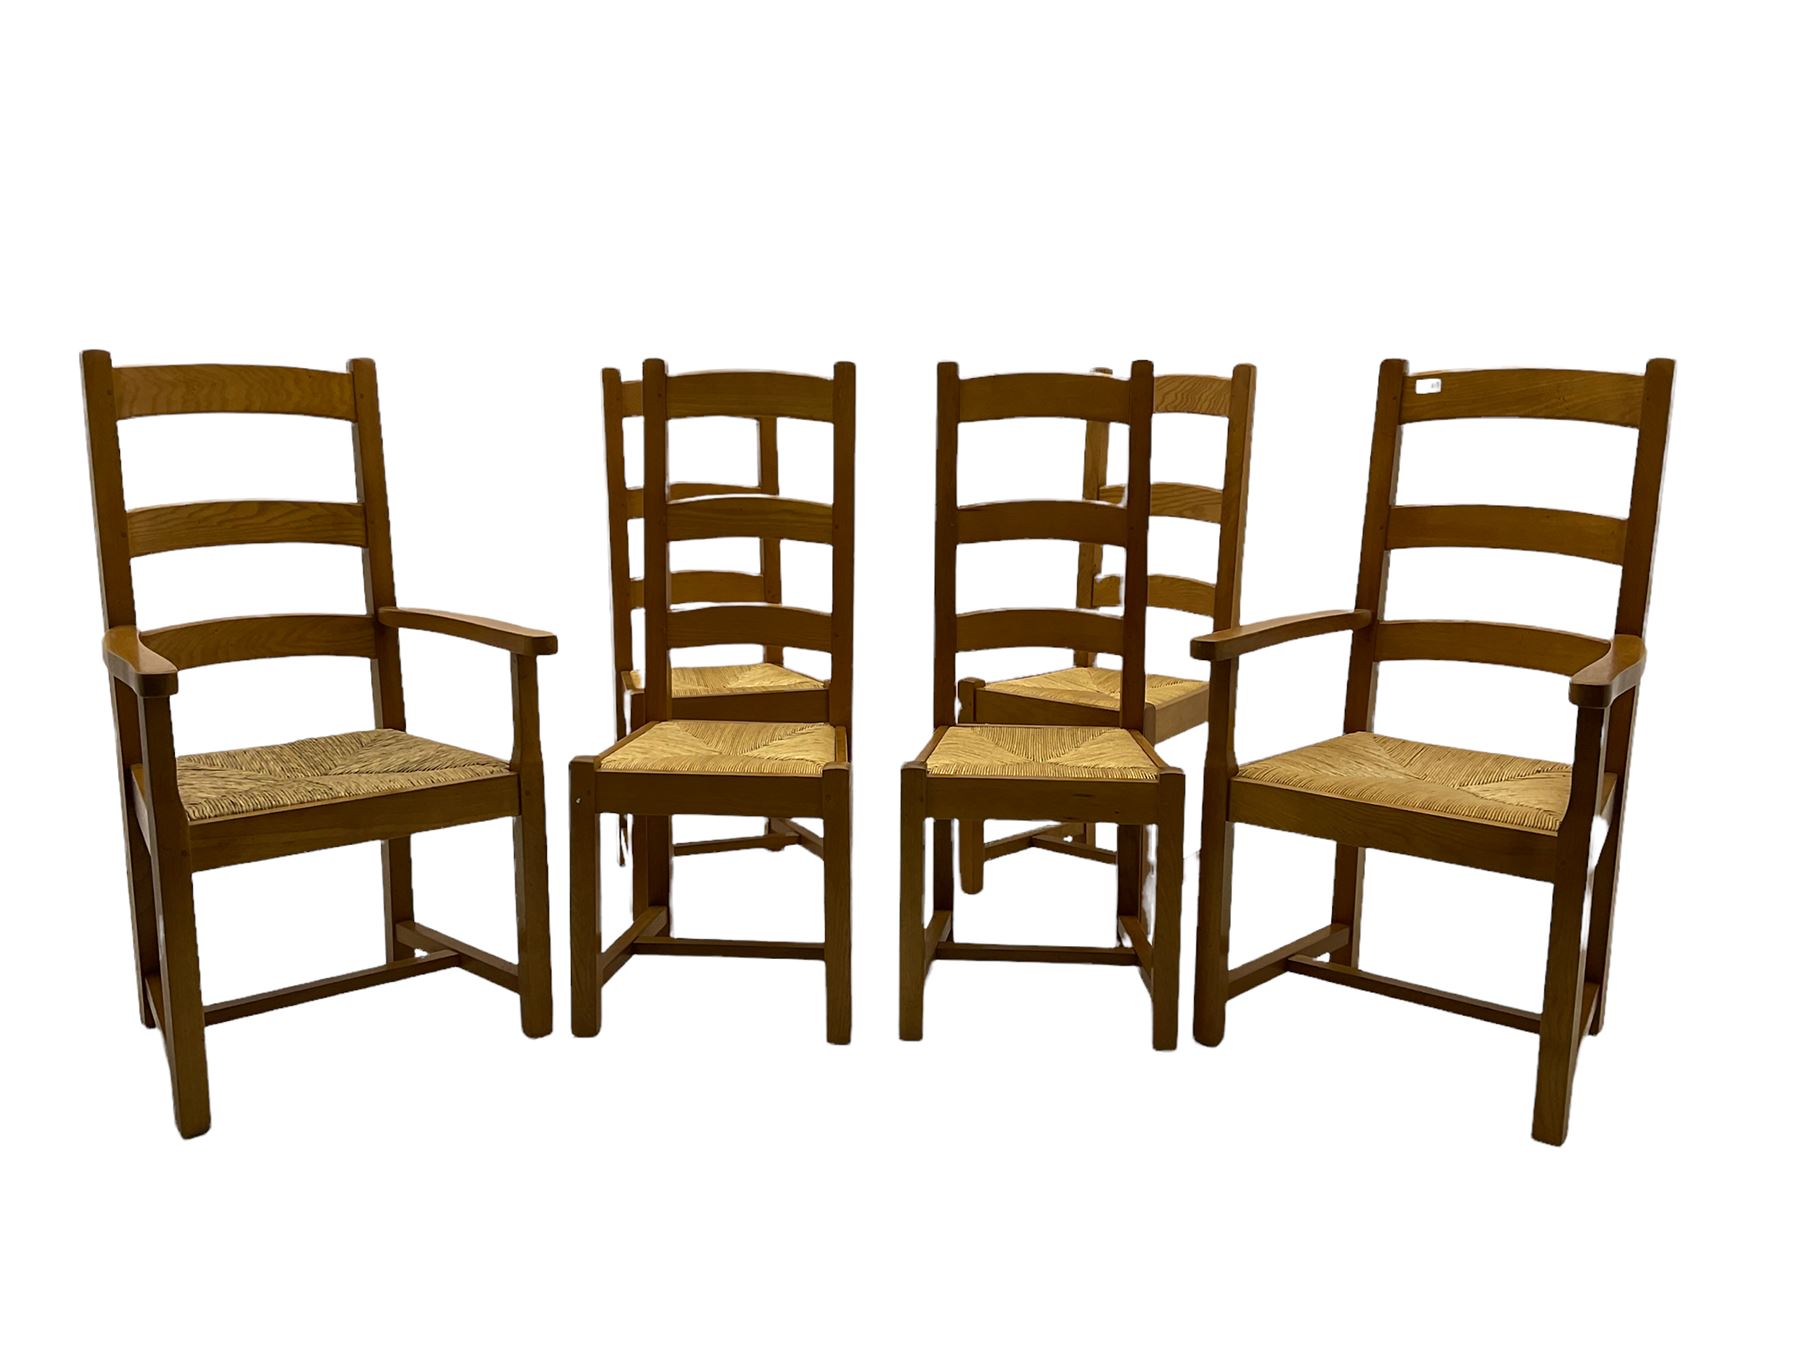 Set of six light oak dining chairs - Image 4 of 6